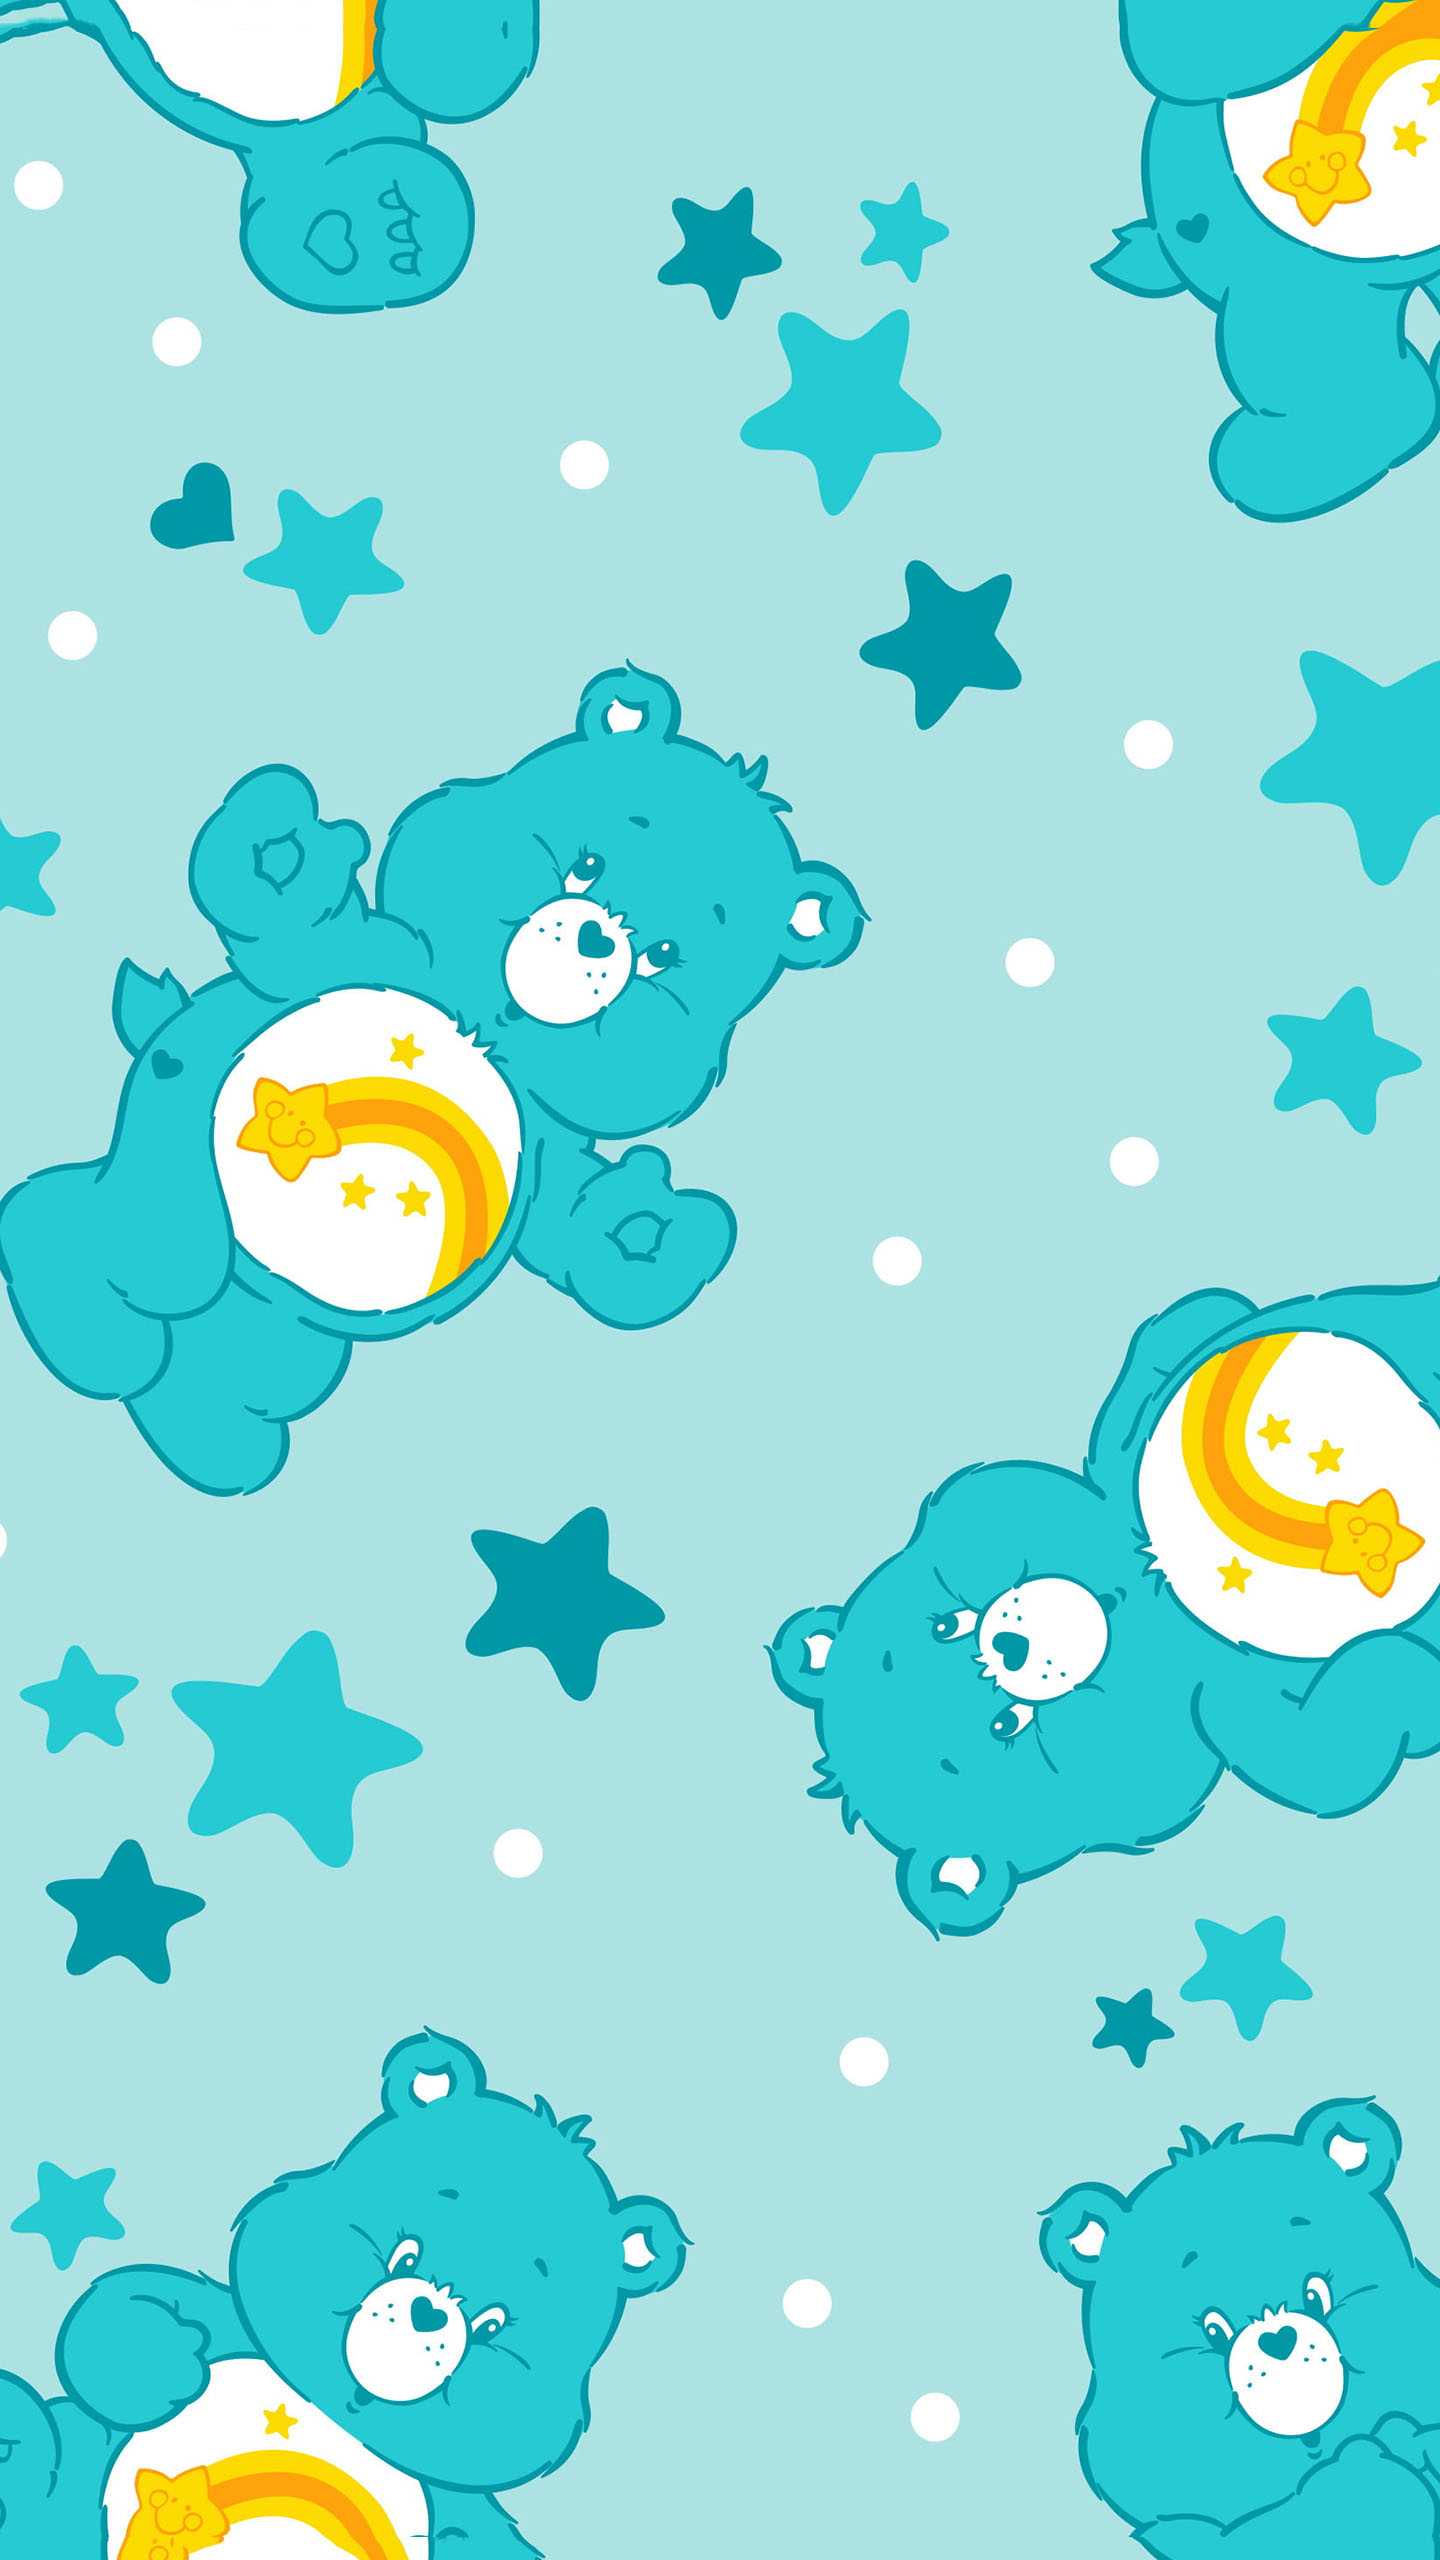 Iphone wallpaper care bears with high-resolution 1080x1920 pixel. You can use this wallpaper for your iPhone 5, 6, 7, 8, X, XS, XR backgrounds, Mobile Screensaver, or iPad Lock Screen - Care Bears